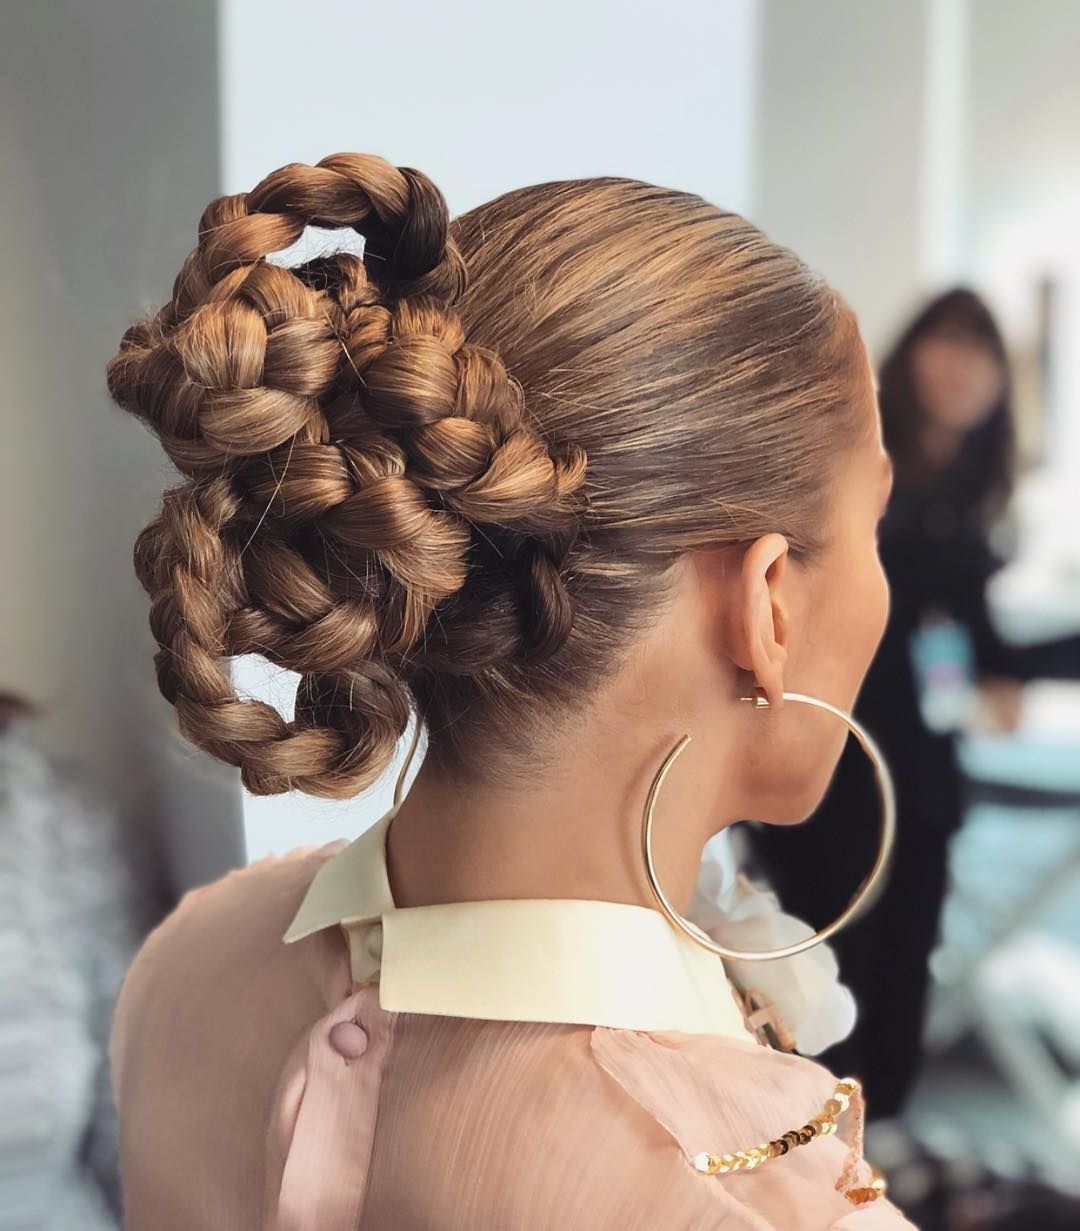 20 Braided Updo Hairstyles – Pictures Of Pretty Updos With Braids Throughout Most Popular Braided Updo For Long Hair (View 11 of 15)